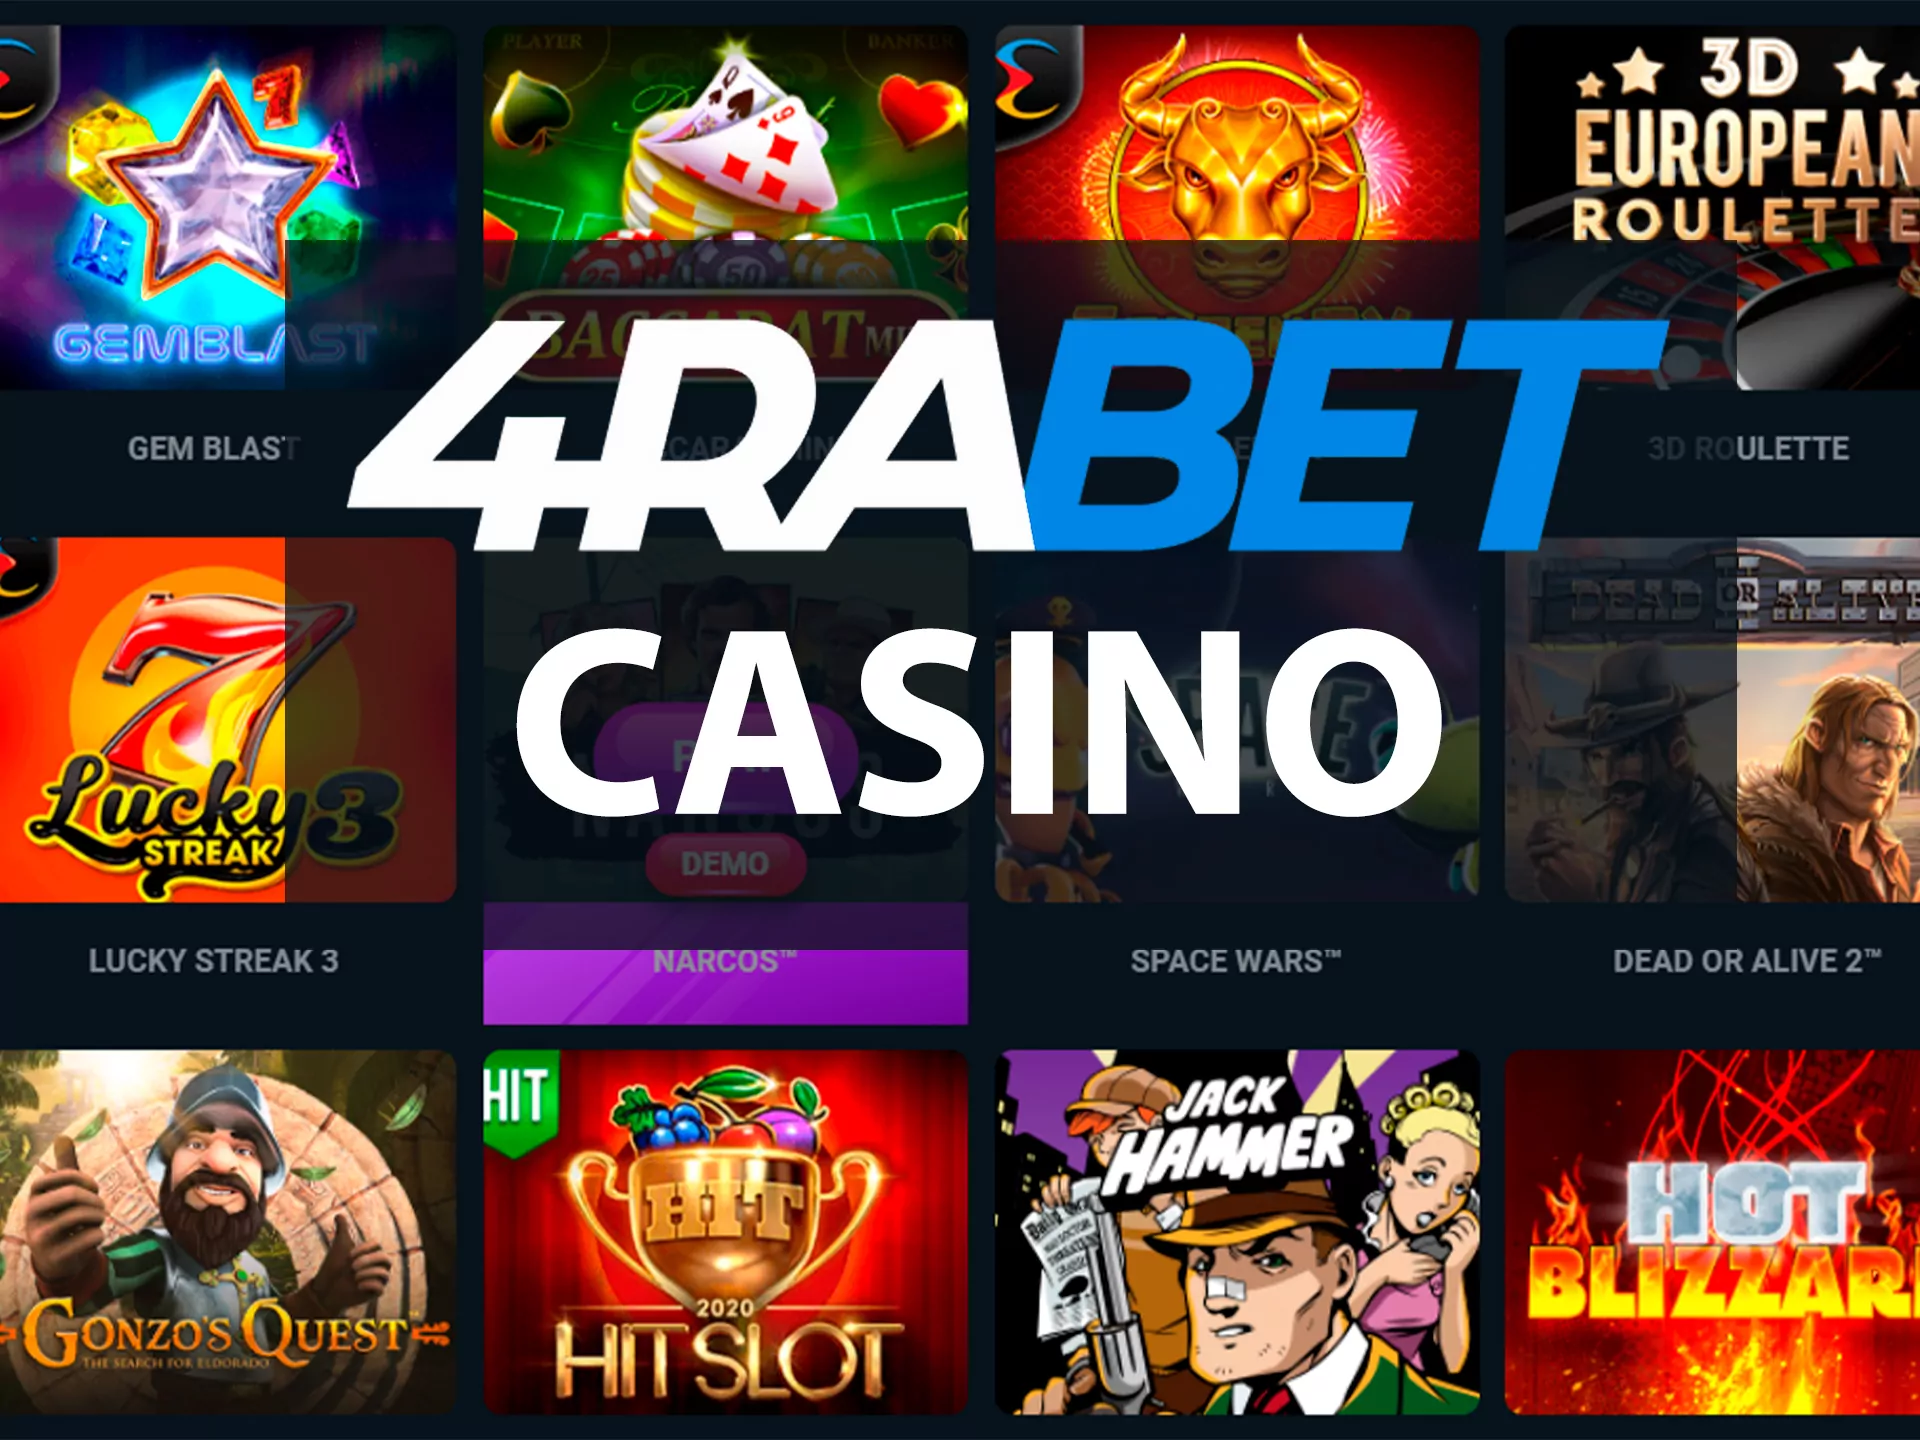 There are many profitable games from trustworthy providers at 4rabet casino.